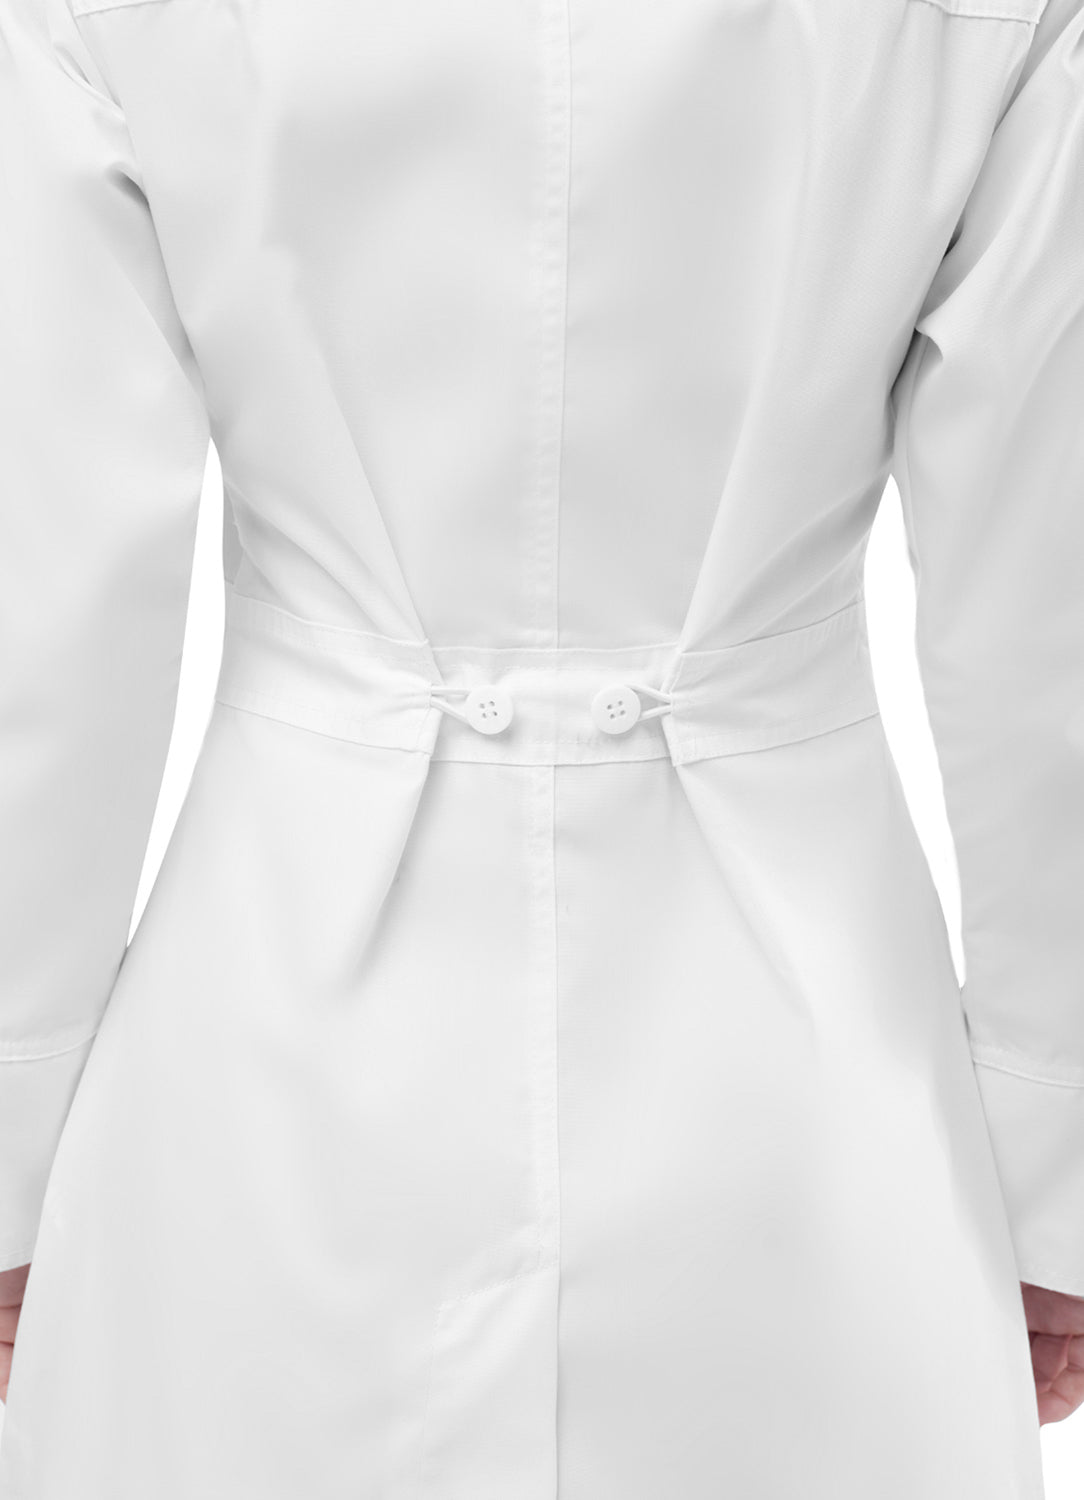 Adar Women's White Flawless Front Large Pockets Lab Coat with buttoned Back midriff View Beyond Medwear Apparel